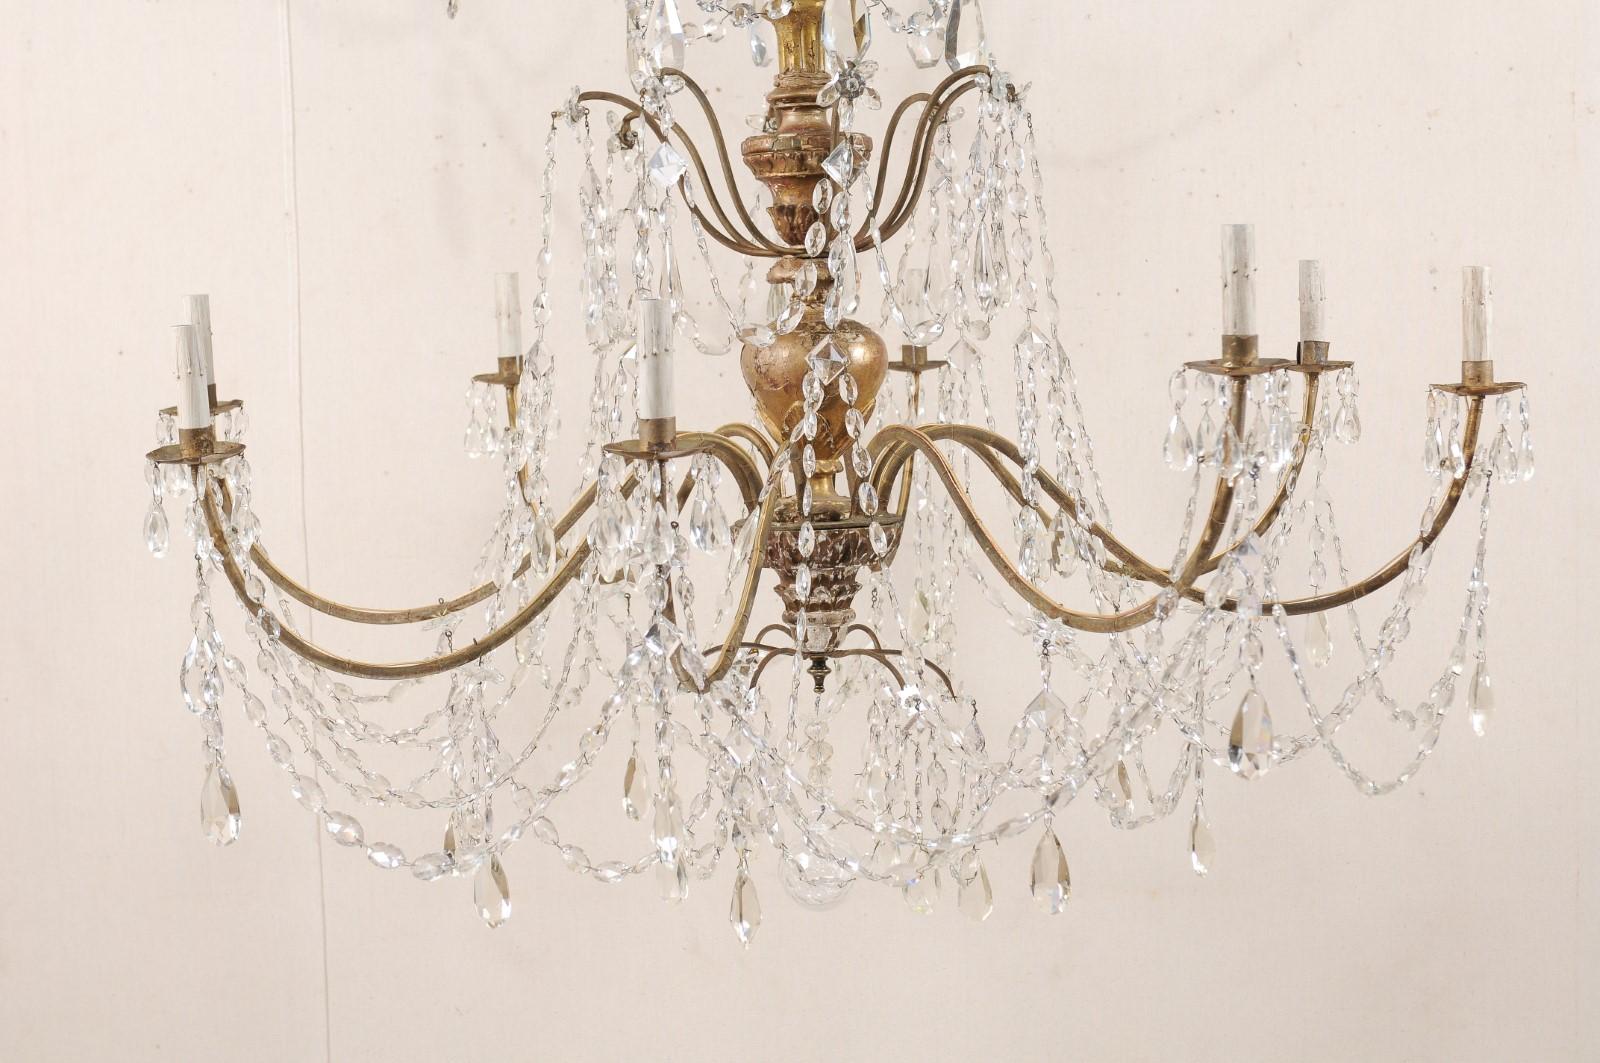 Carved A Superb Italian Antique Crystal & Giltwood Column Chandelier, 4.5 ft Tall!